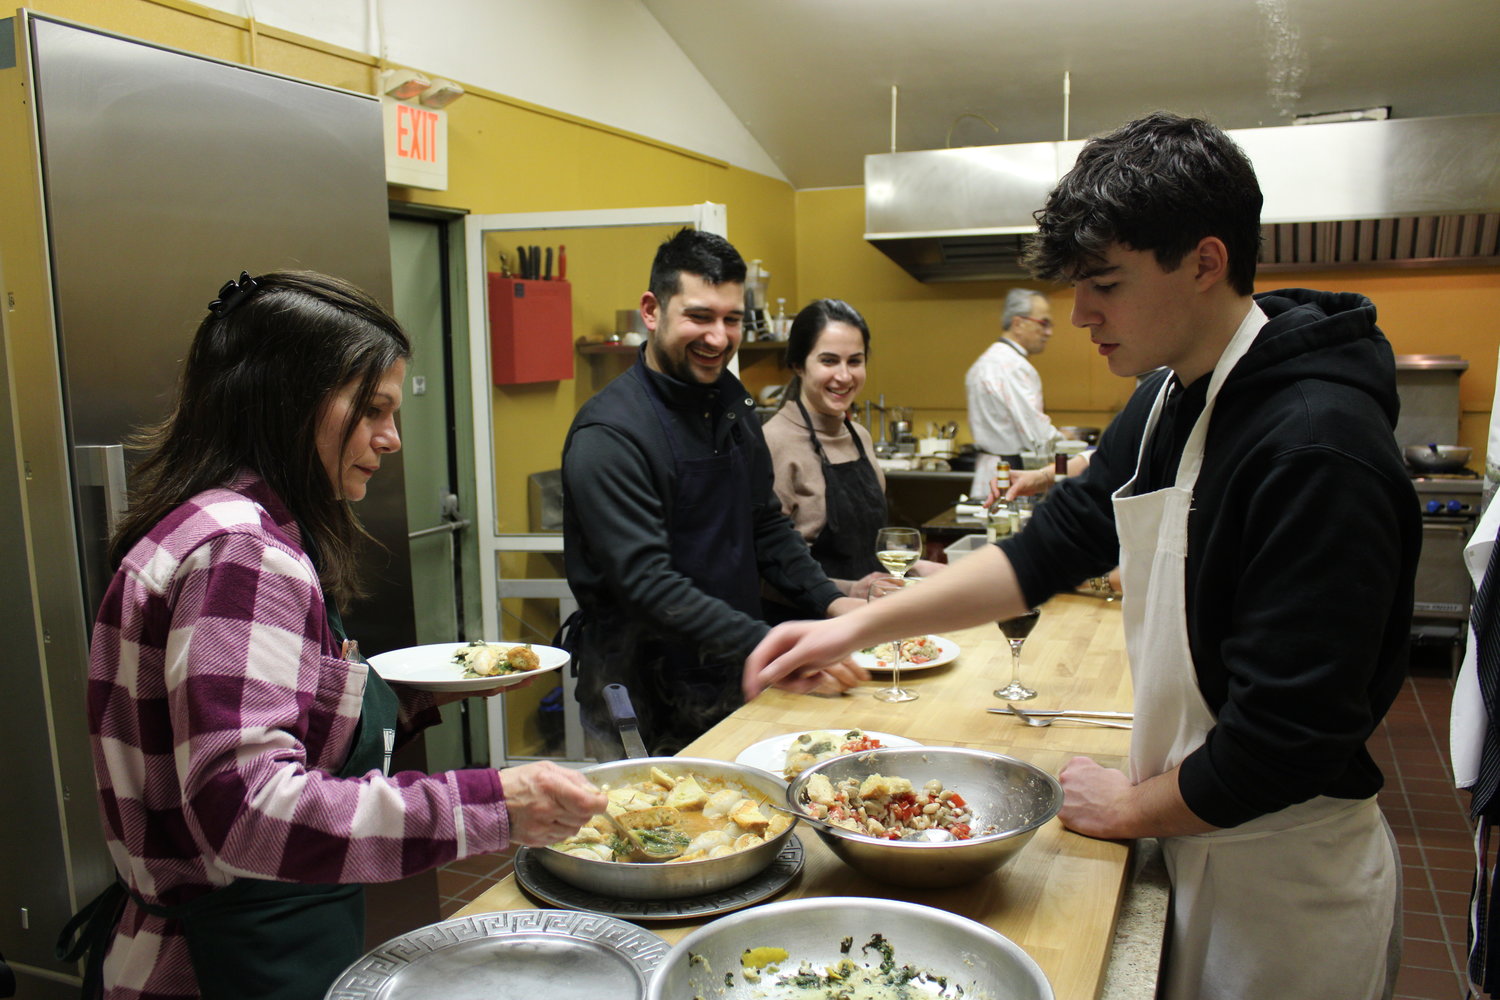 DON’T FORGET THE SAUCE: Dee Schena fills a plate to join the others in trying the delicious meal they’ve prepared.